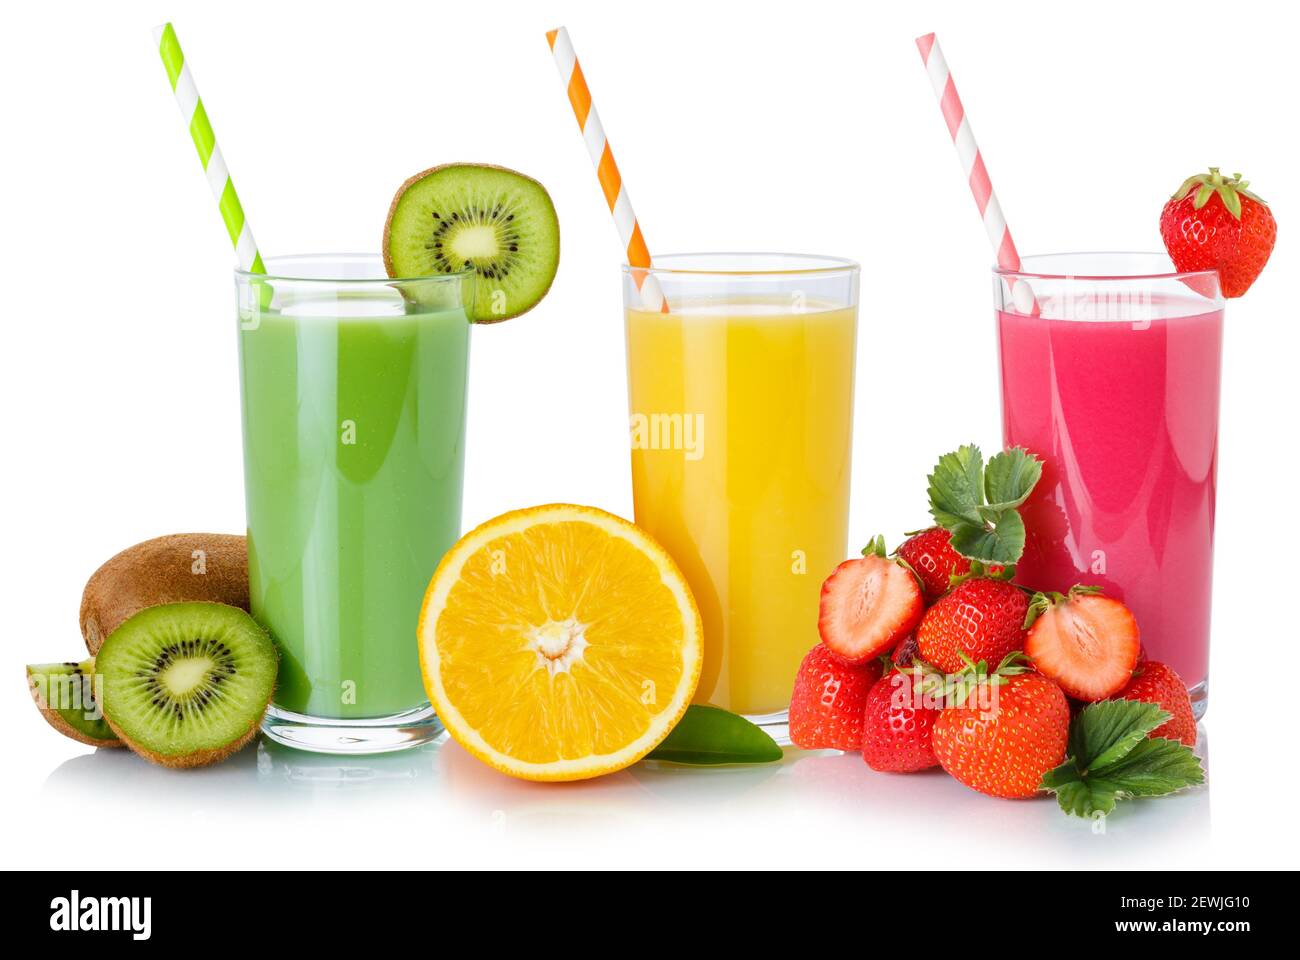 Fruit juice smoothie smoothies drink drinks straw fruits glass isolated on a white background. Stock Photo